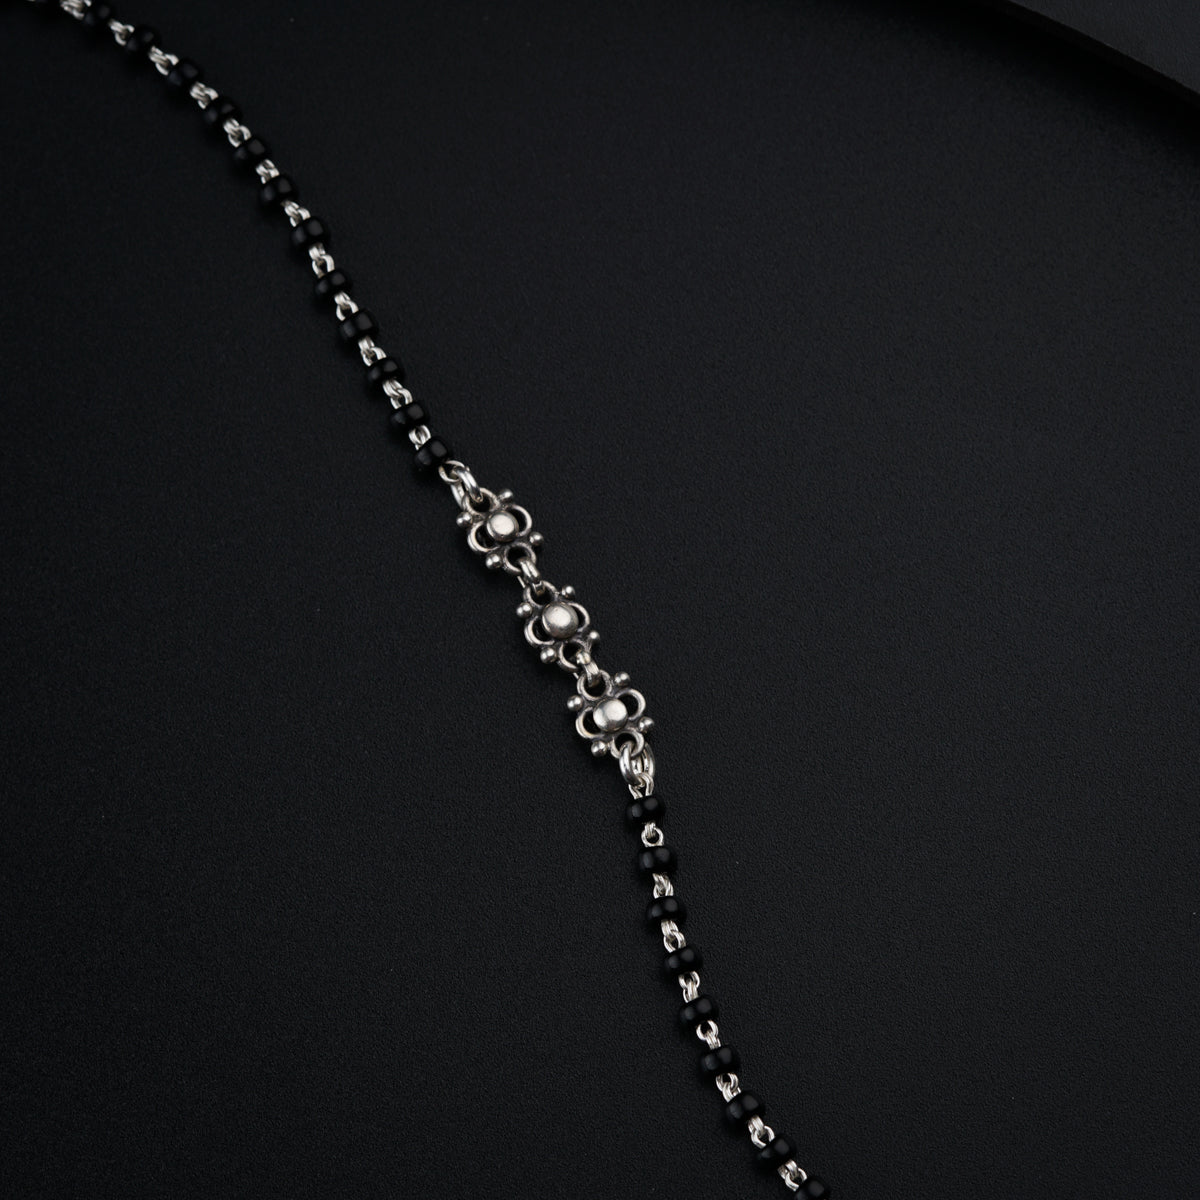 a black and silver necklace on a black surface